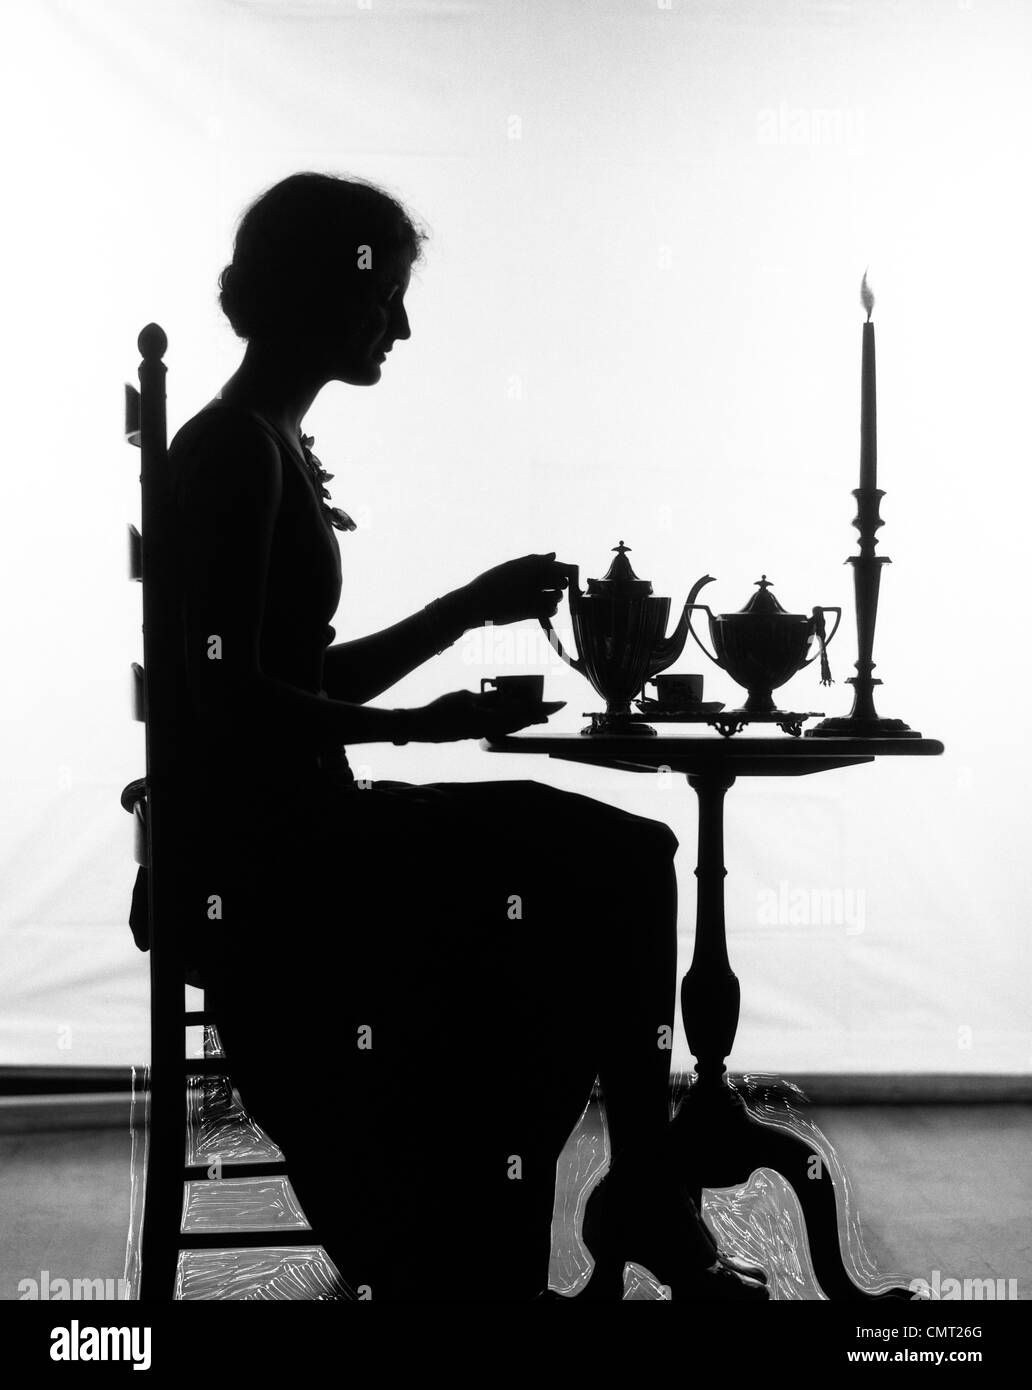 1920s SILHOUETTE OF WOMAN SITTING AT TABLE POURING CUP OF TEA Stock Photo